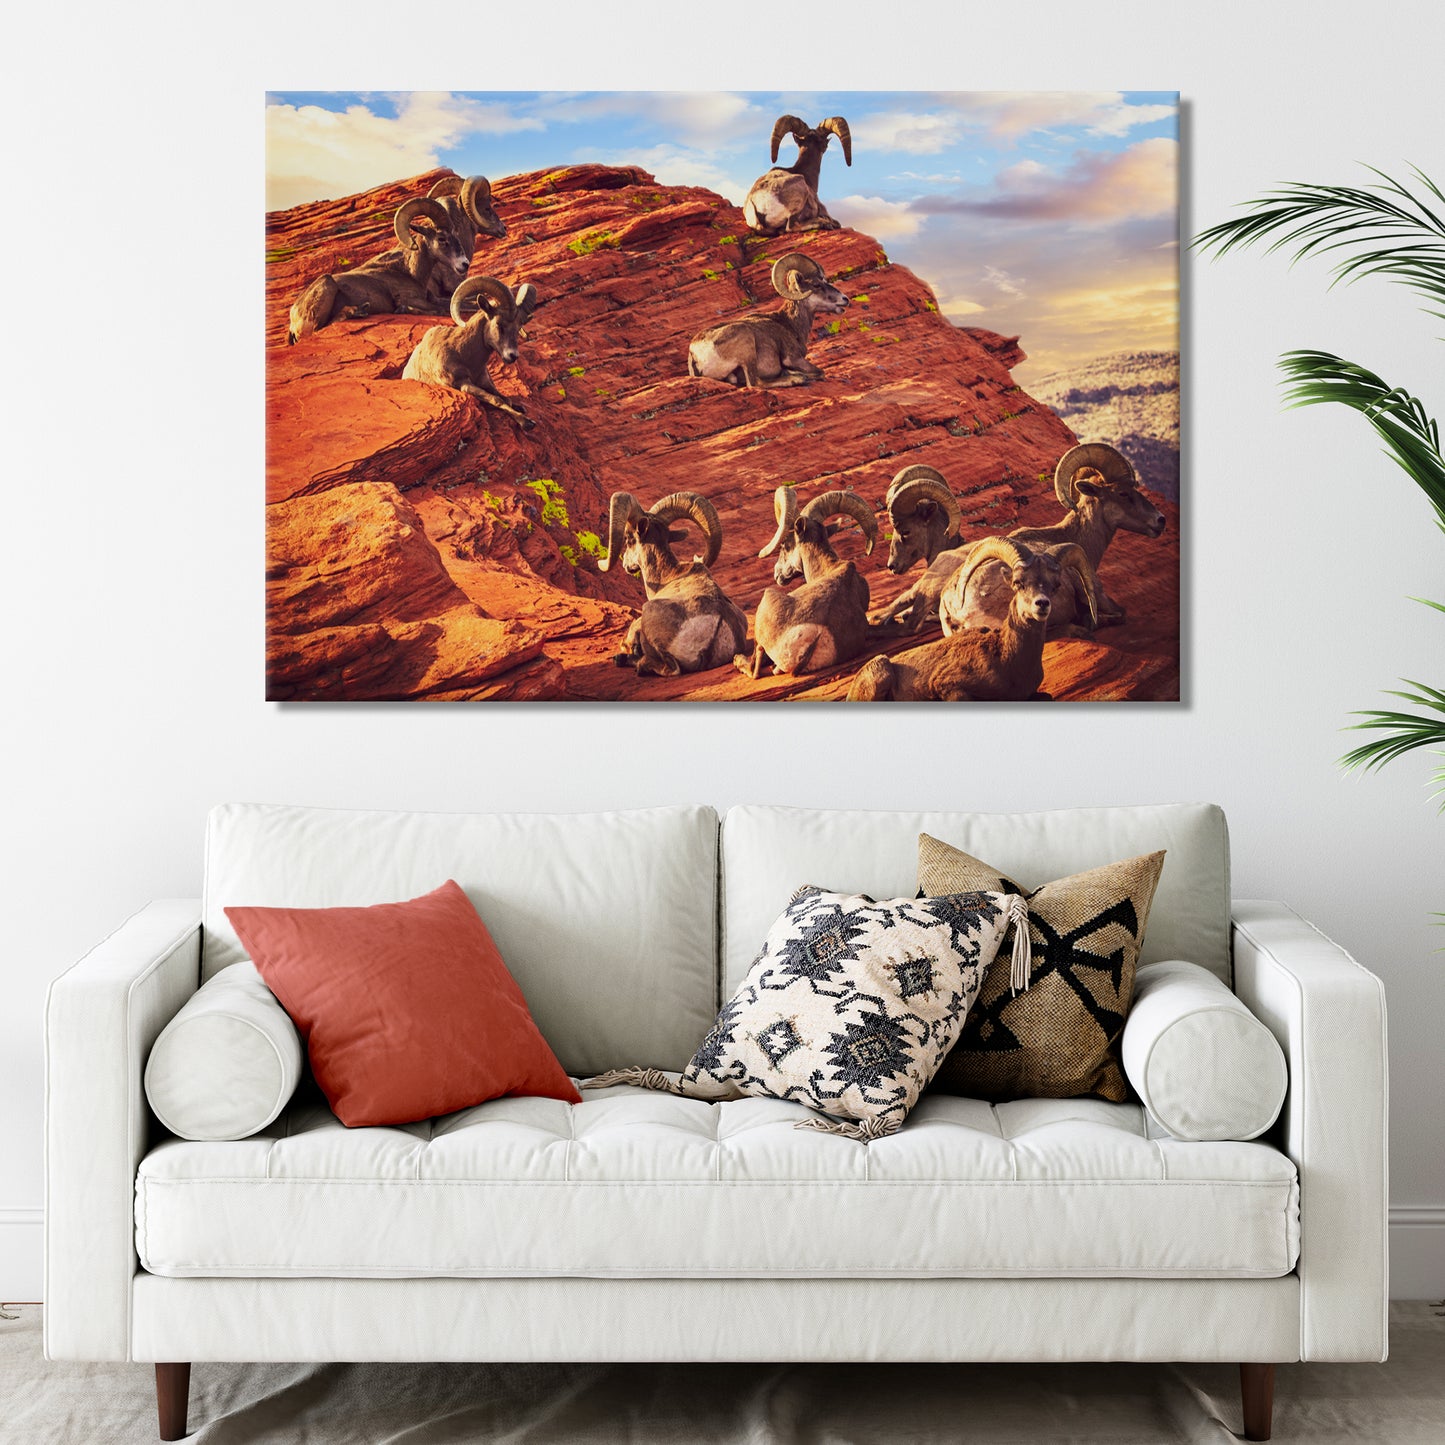 Big Horn Sheep Landscape Canvas Wall Art - Image by Tailored Canvases